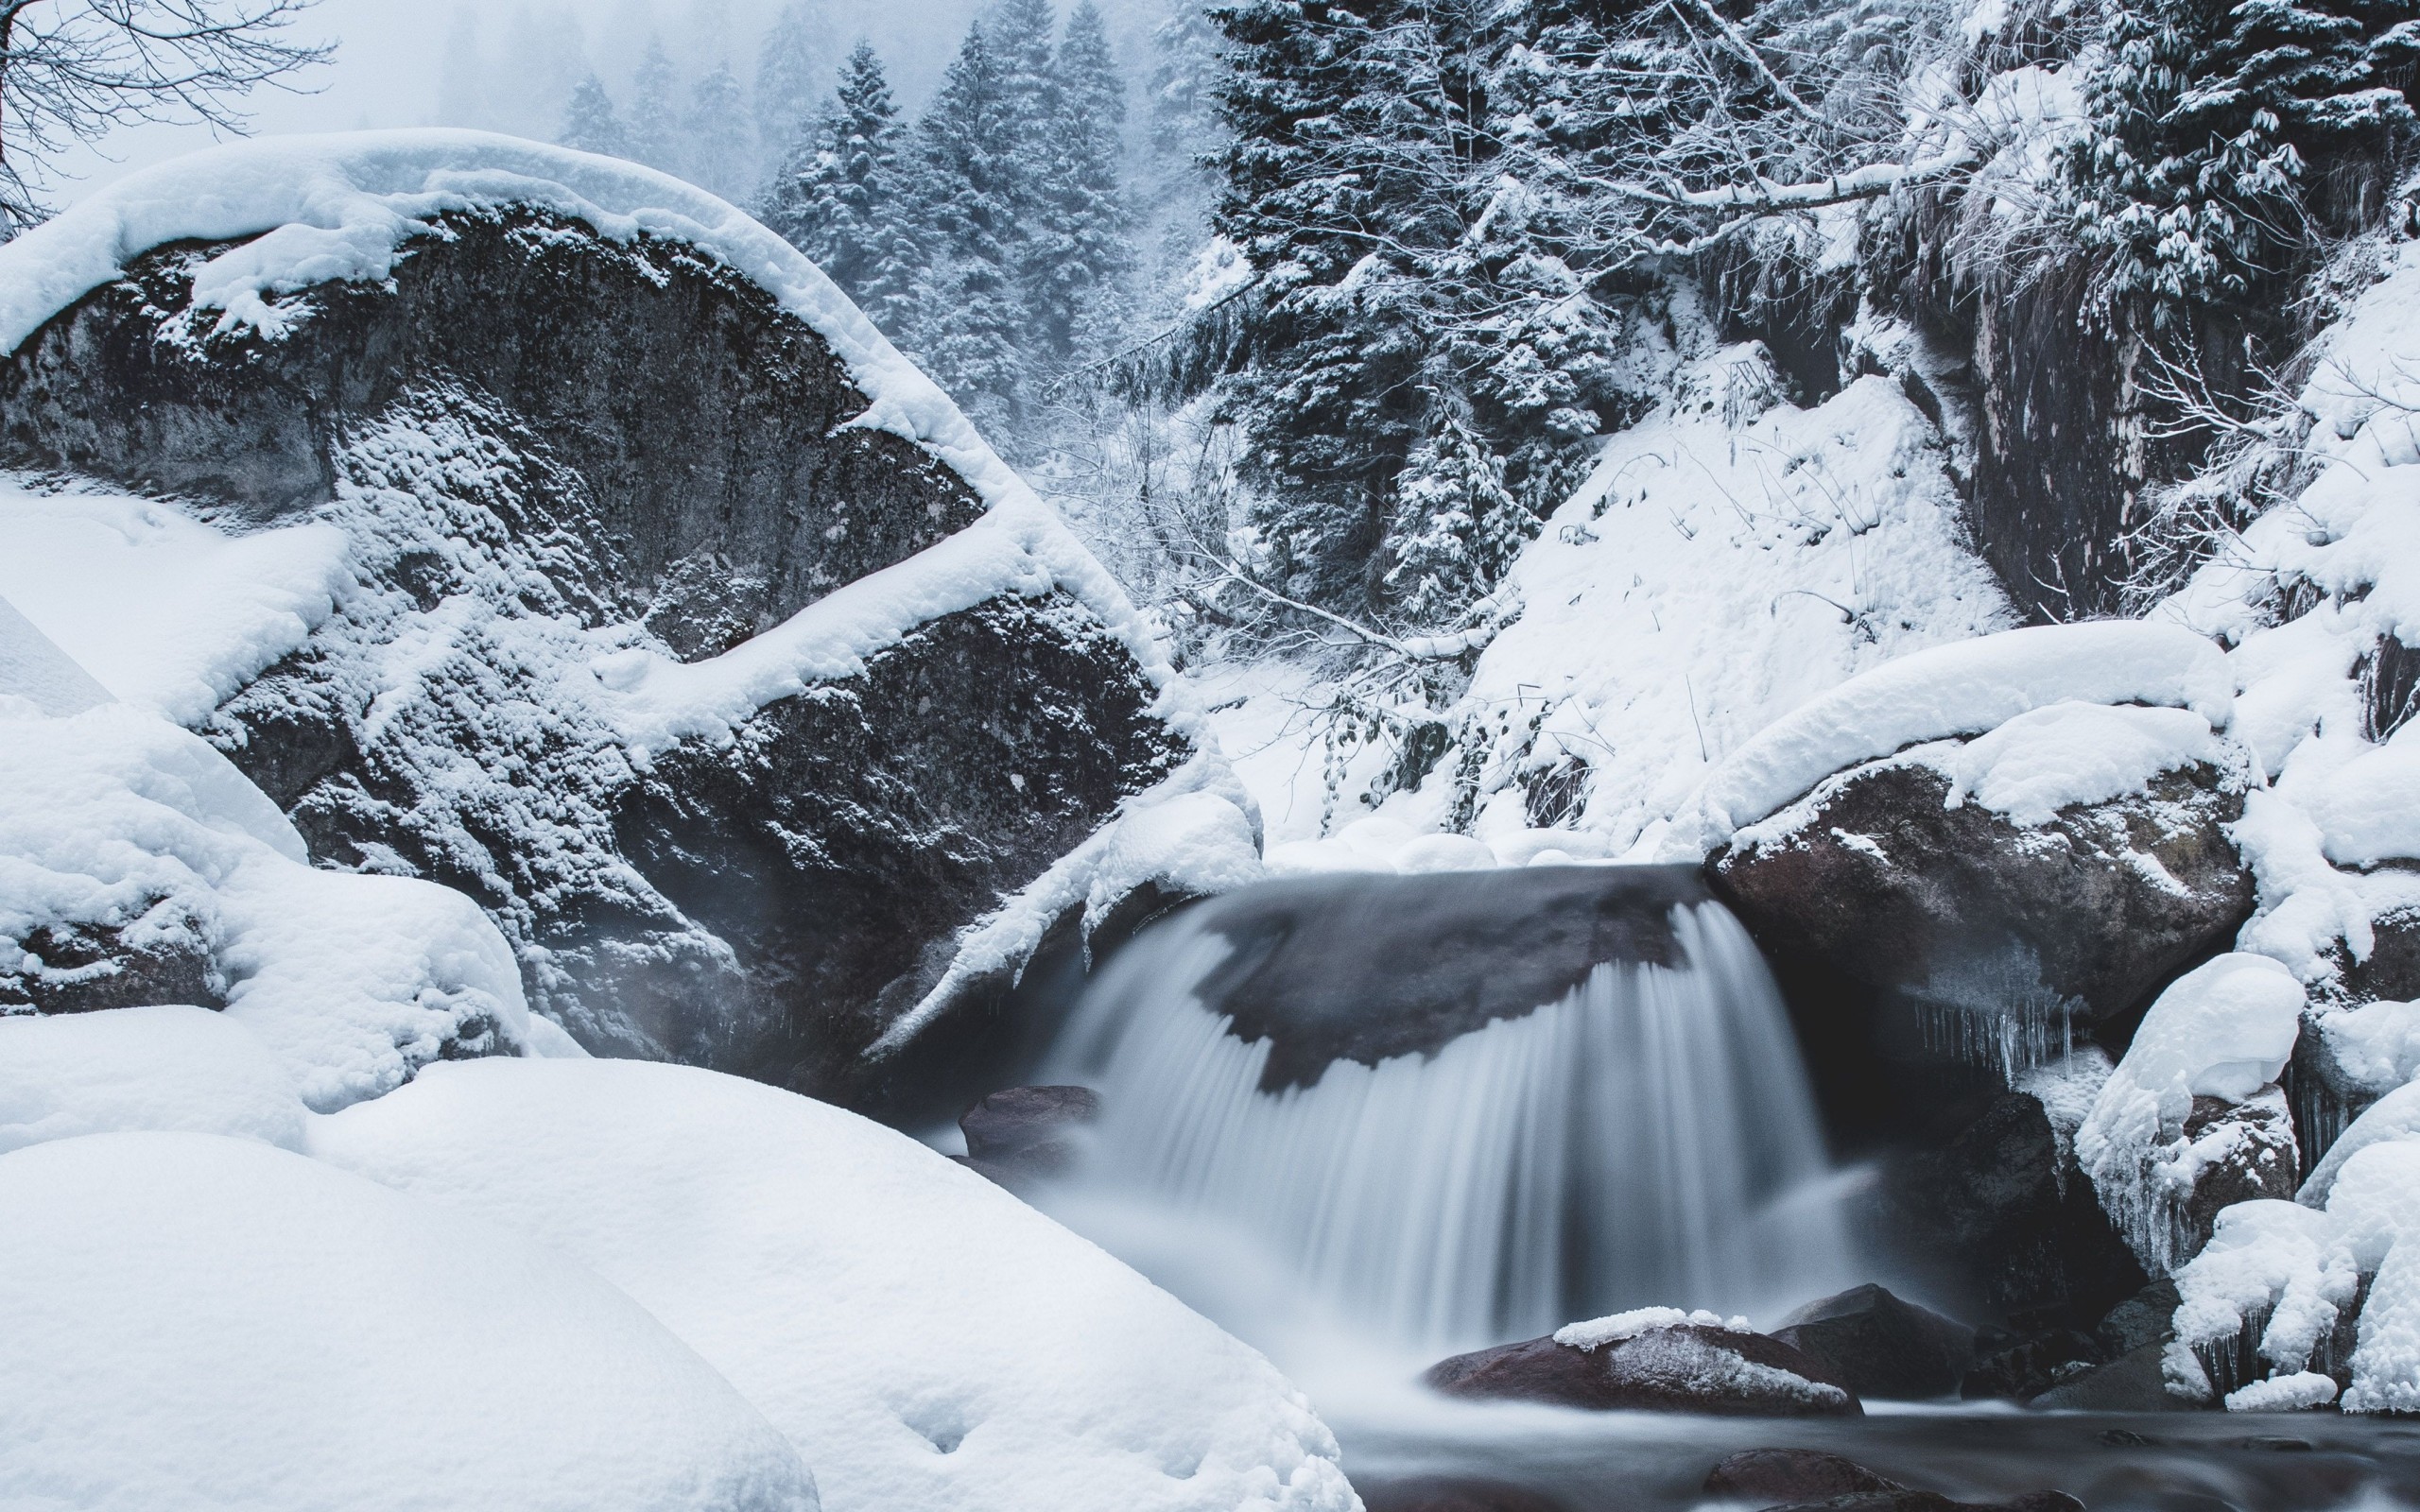 Download 2560x1600 Snow, Rocks, Waterfall, Stream, Winter, Scenic, Foggy, Trees Wallpaper for MacBook Pro 13 inch